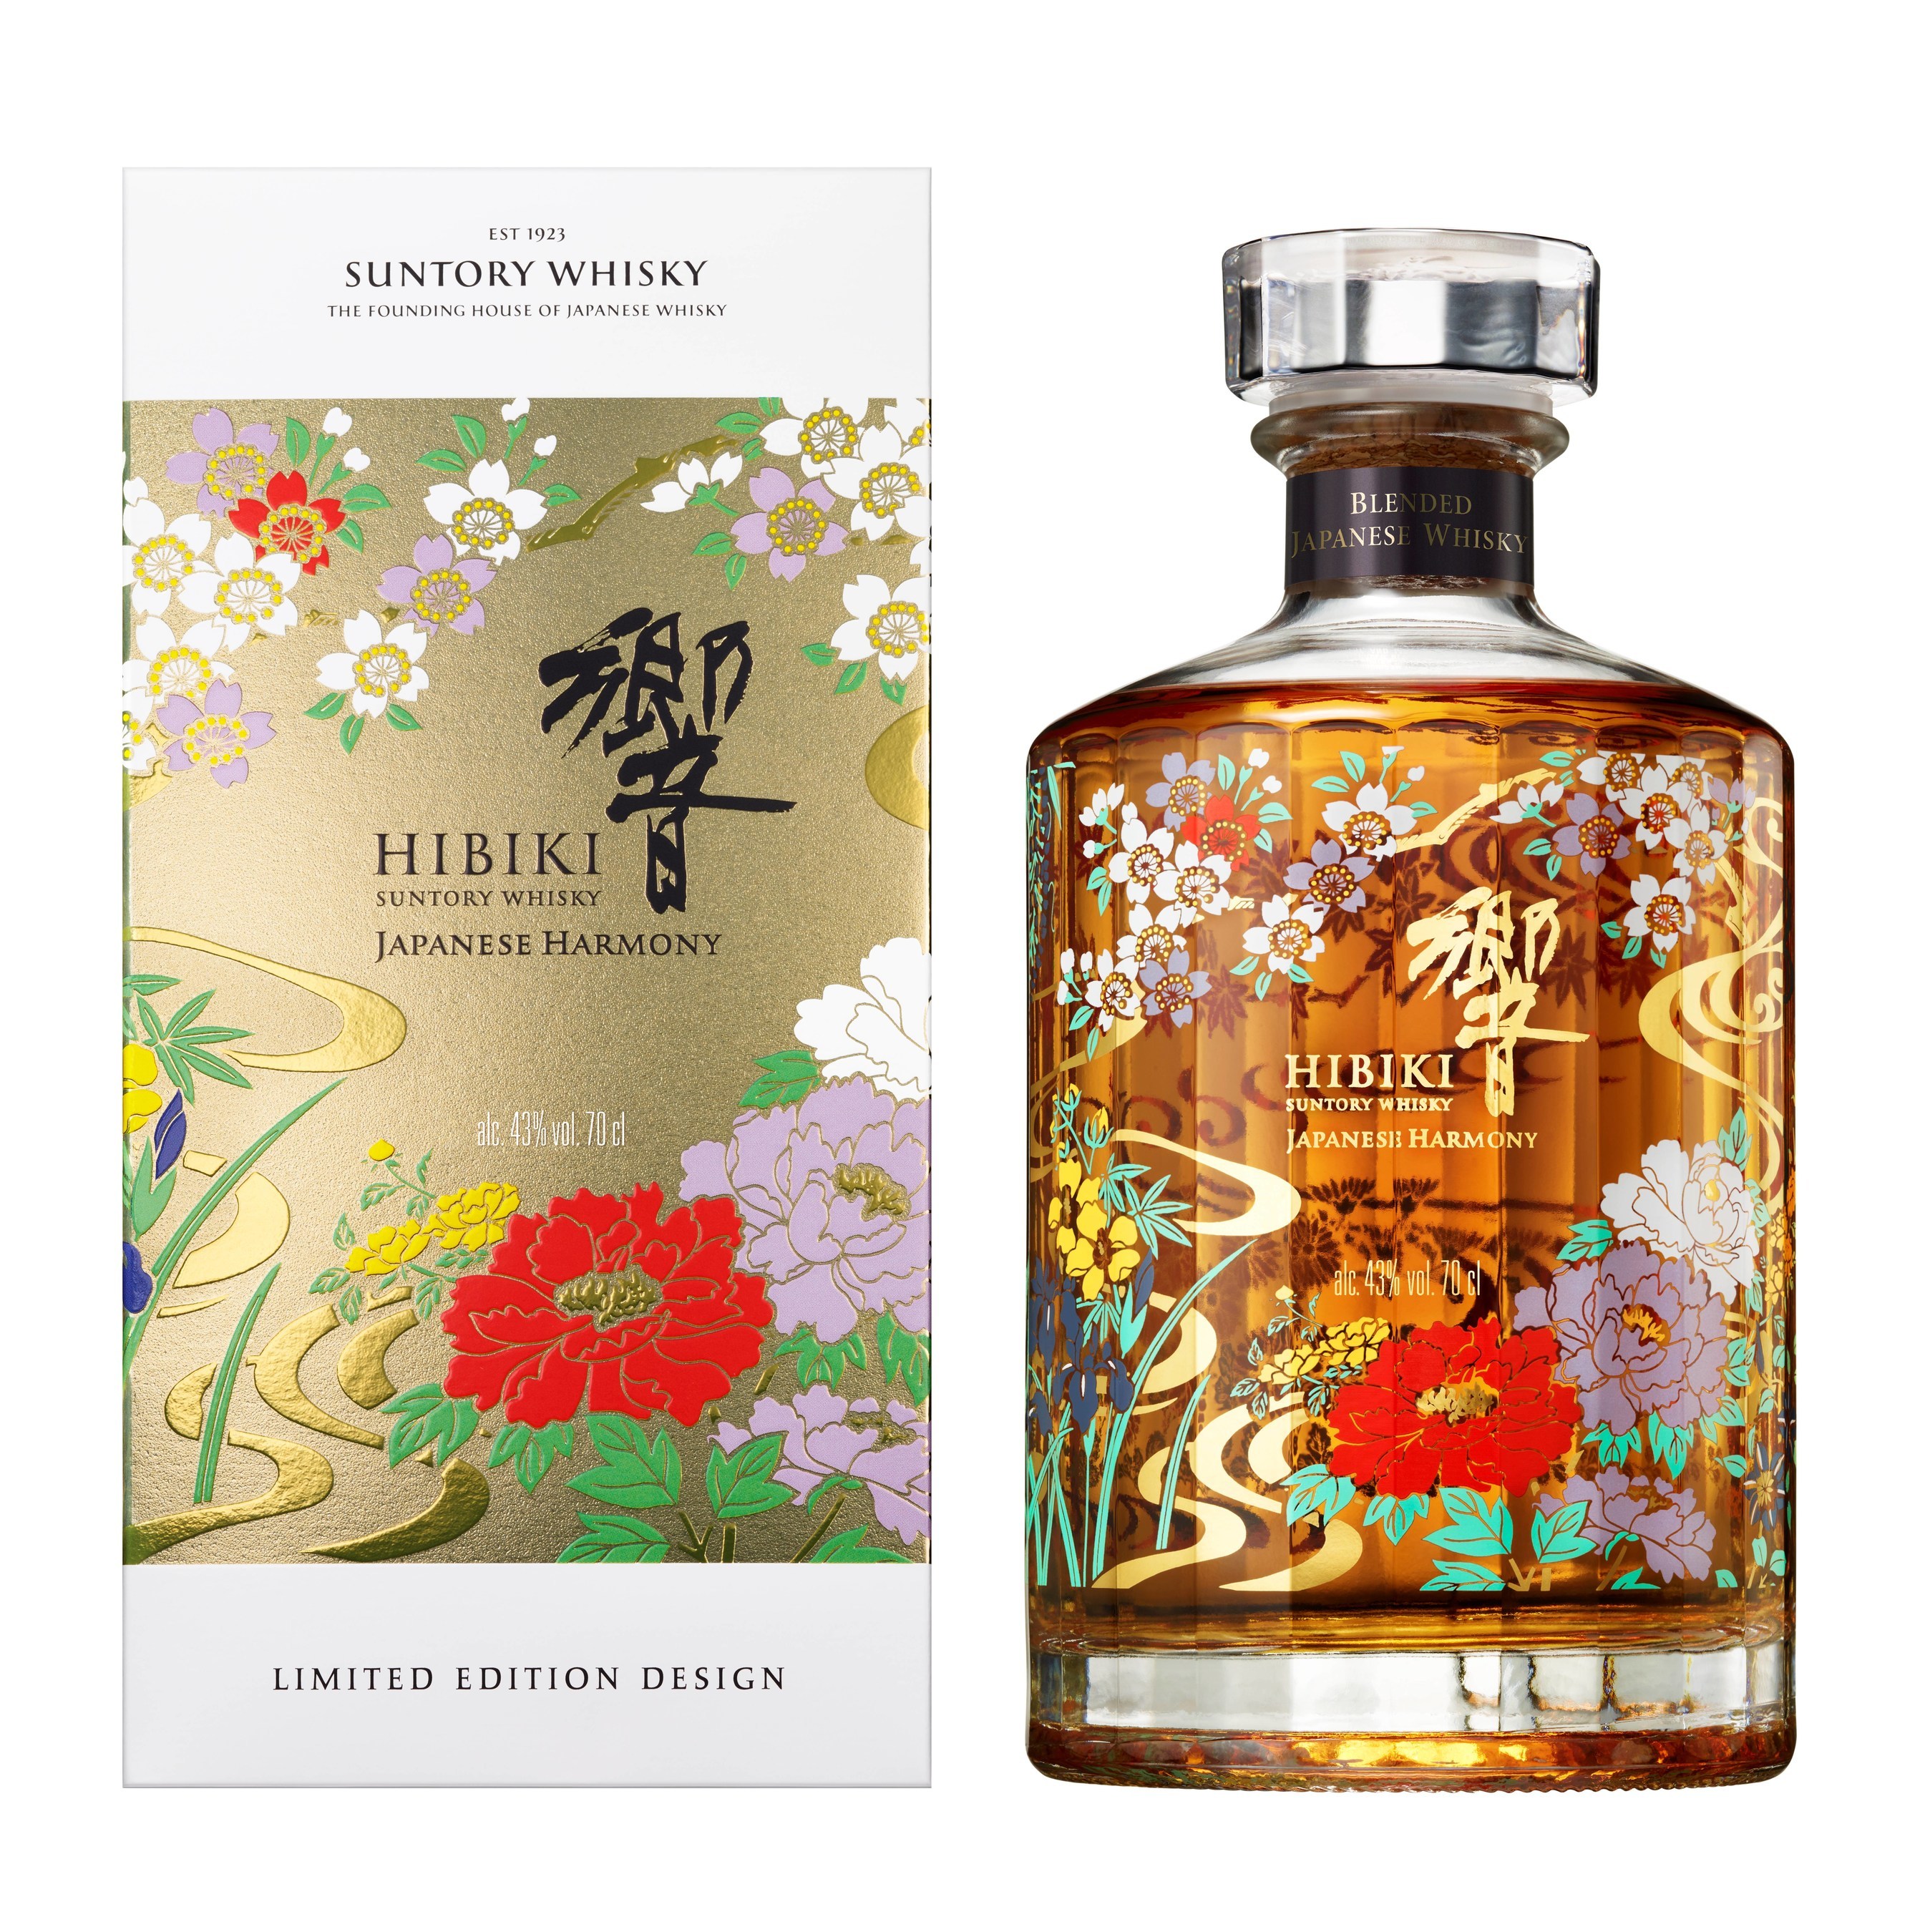 The House Of Suntory Debuts The 2021 Limited-Edition Design Bottle